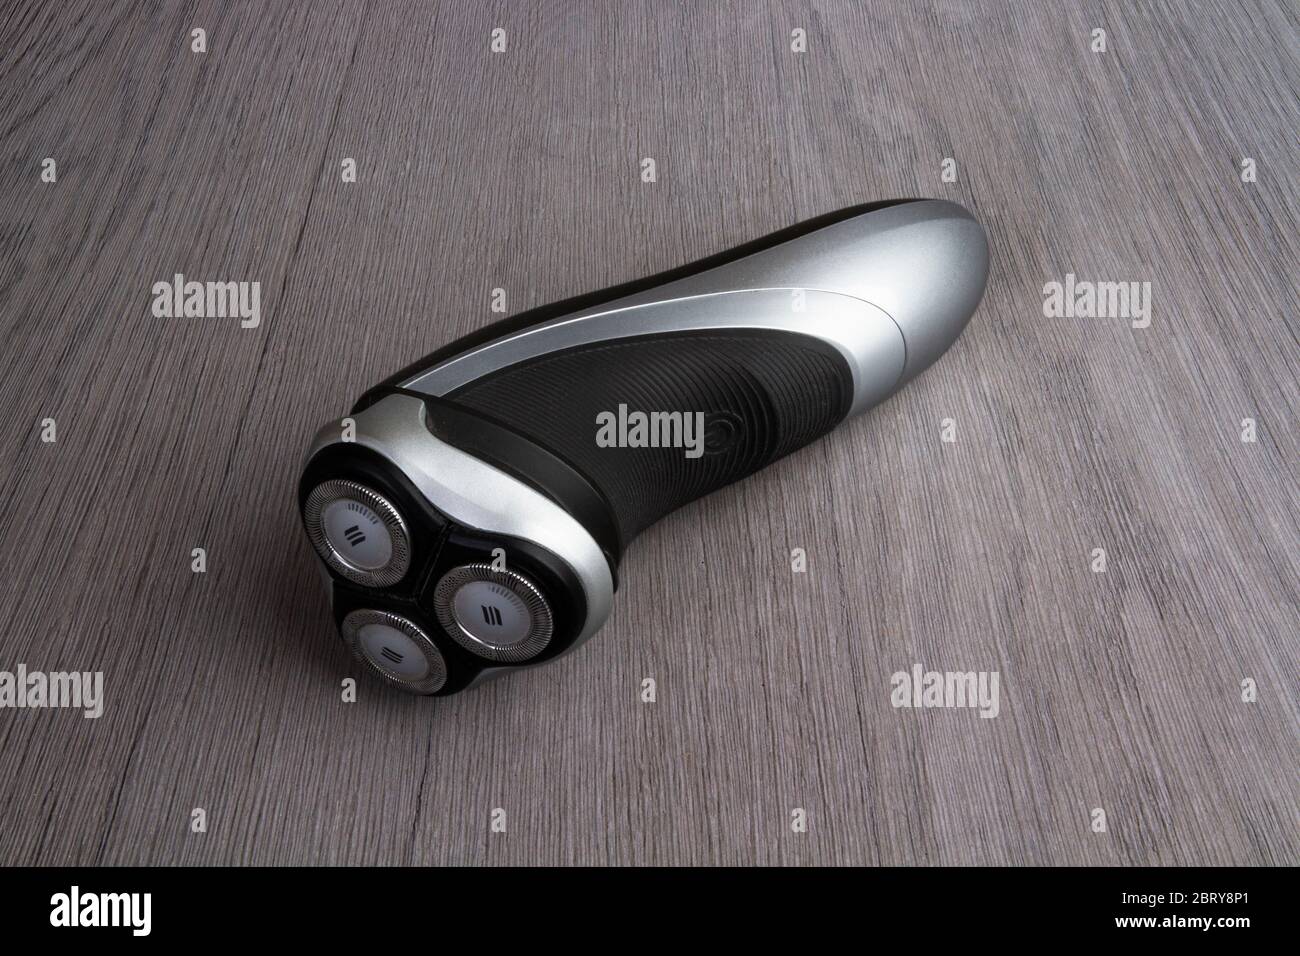 Electric shaver Stock Photo